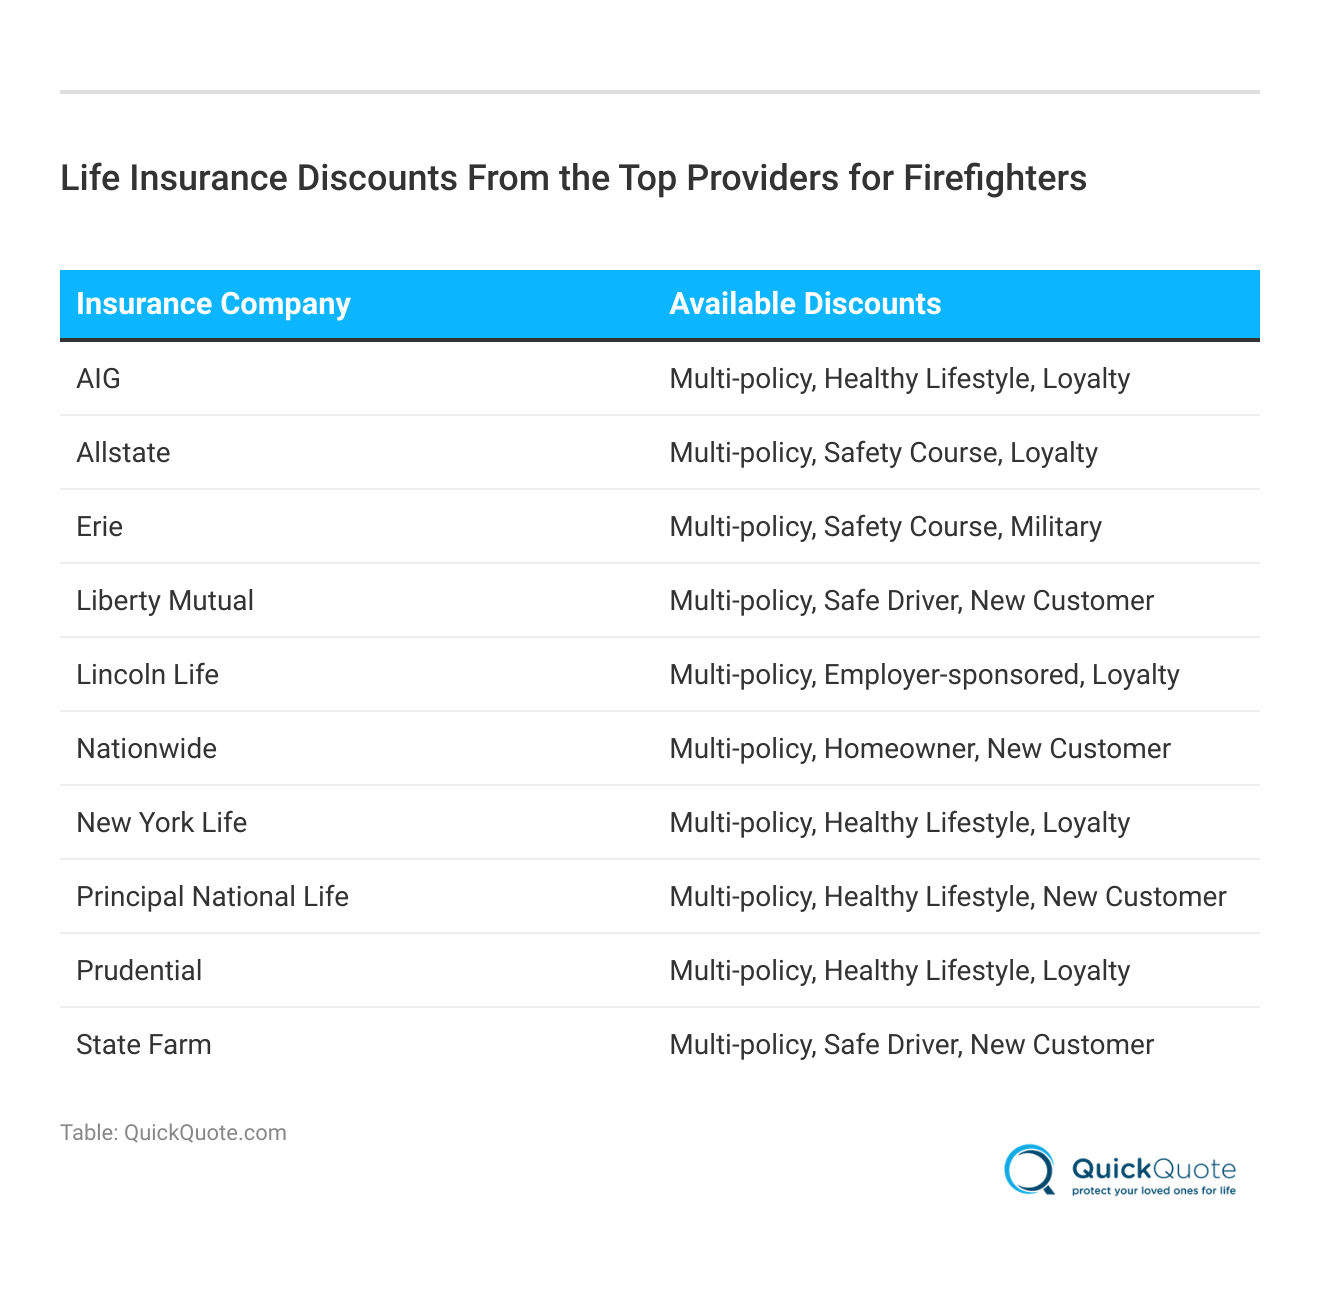 <h3>Life Insurance Discounts From the Top Providers for Firefighters</h3>